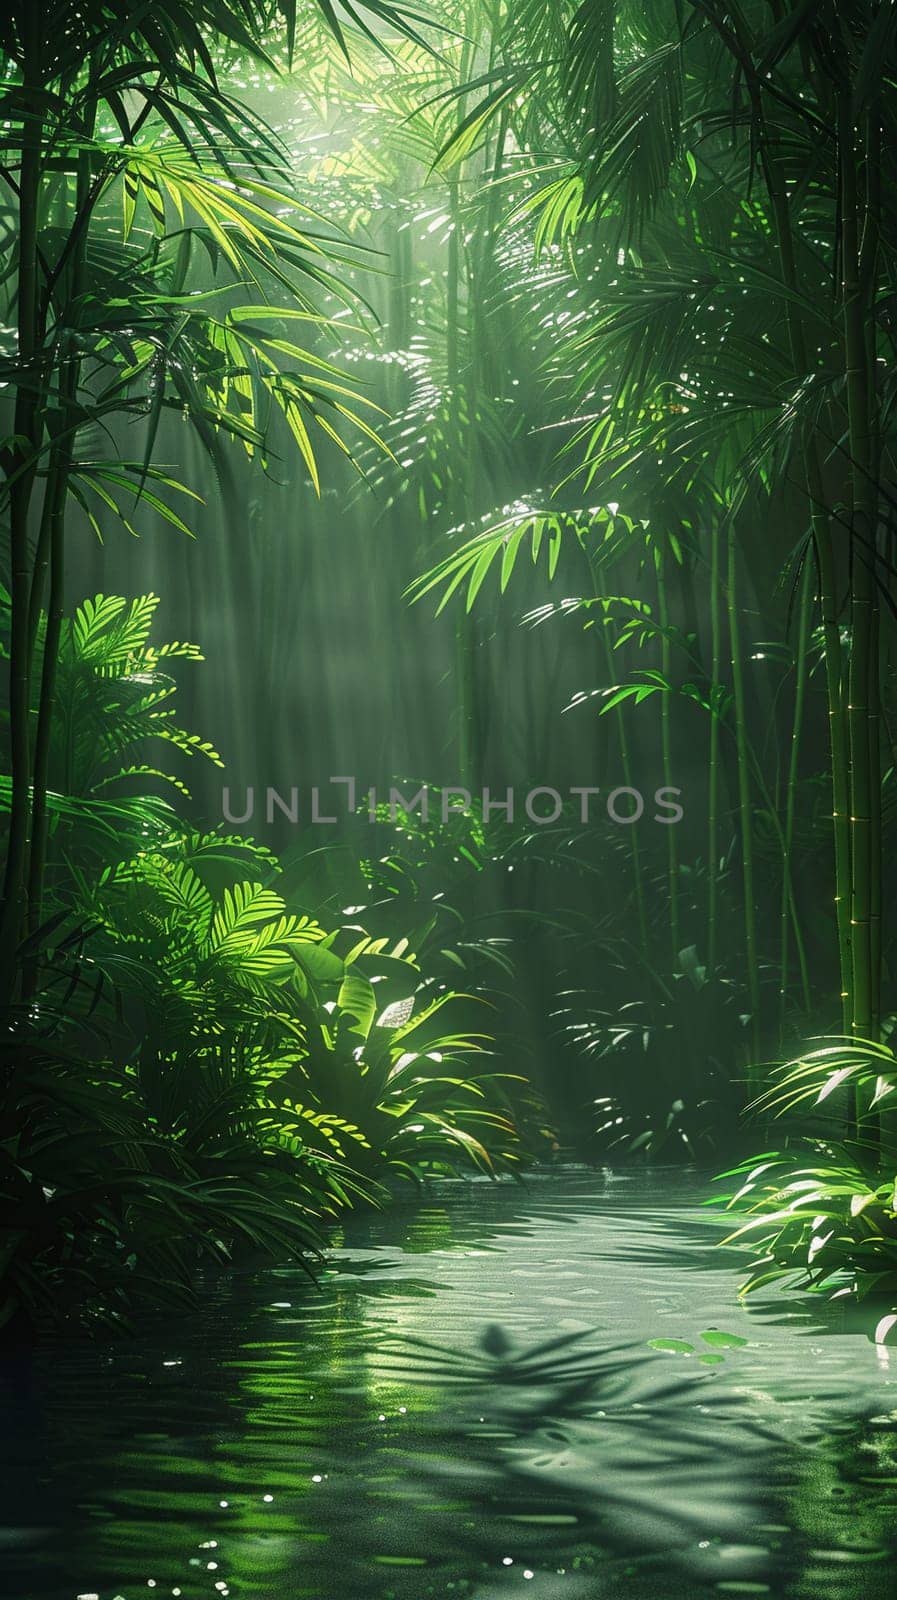 Sunlight casting shadows through a bamboo forest by Benzoix